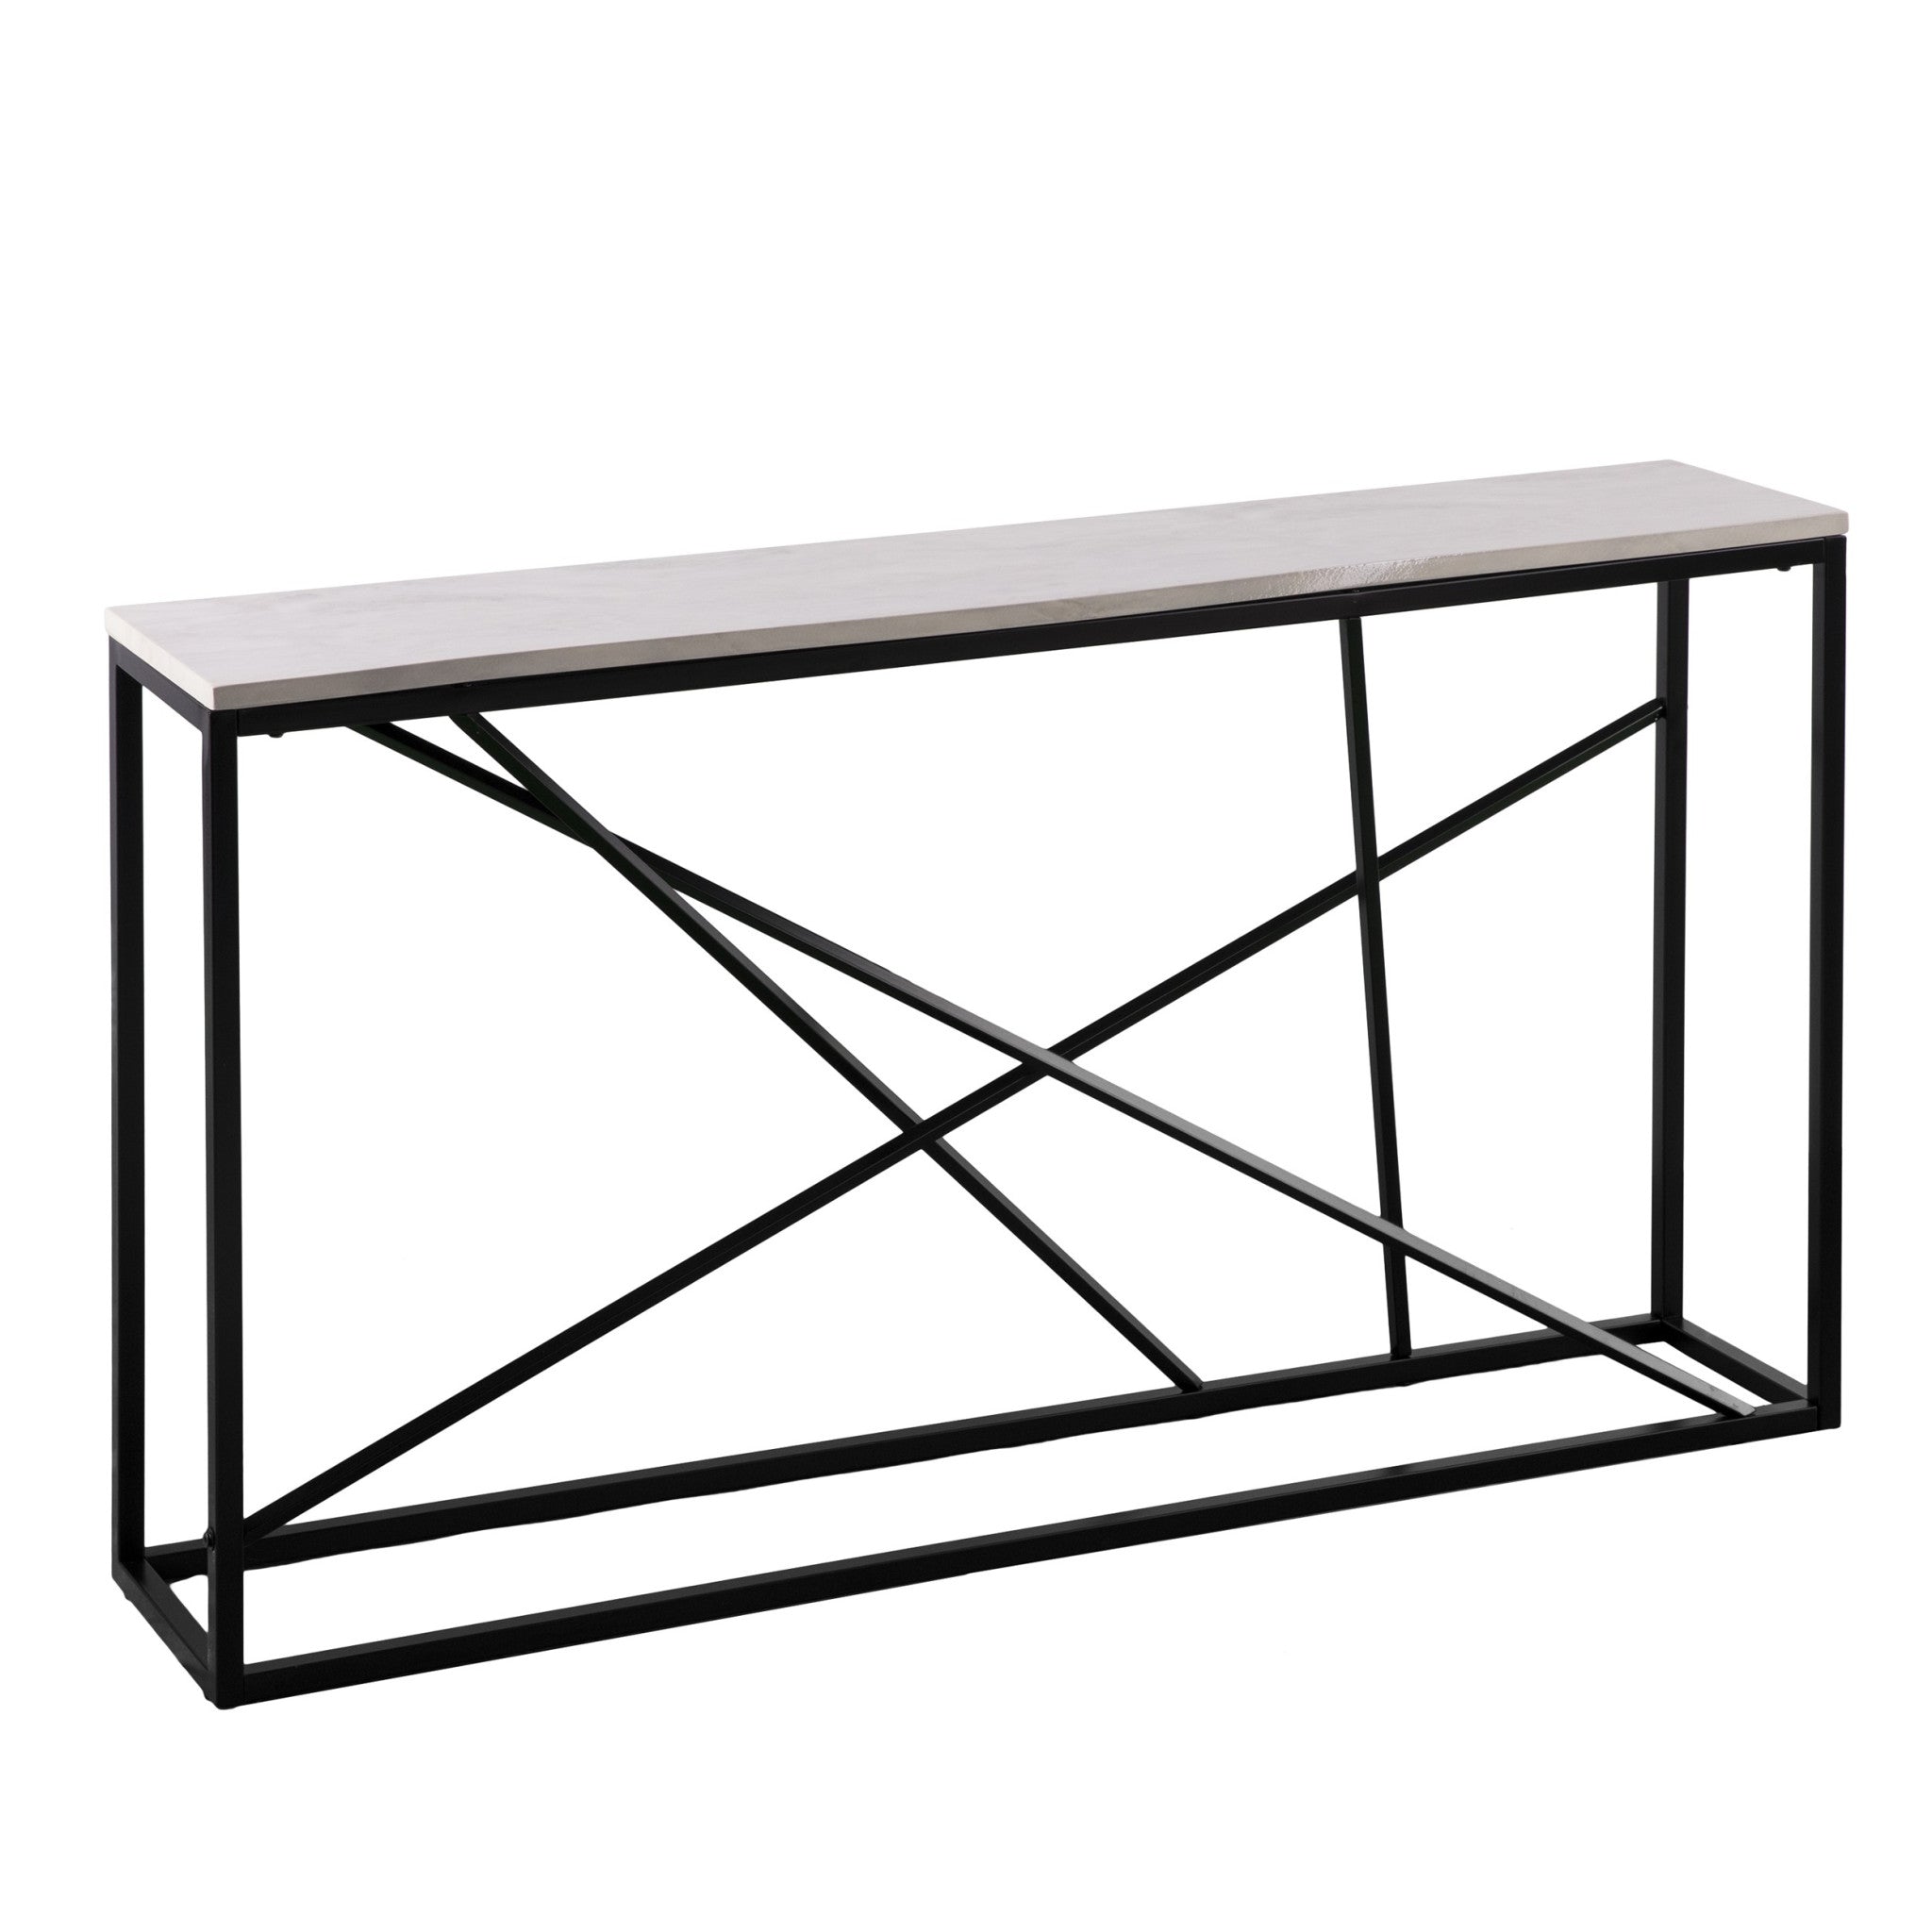 52" White and Black Faux Marble Frame Console Table